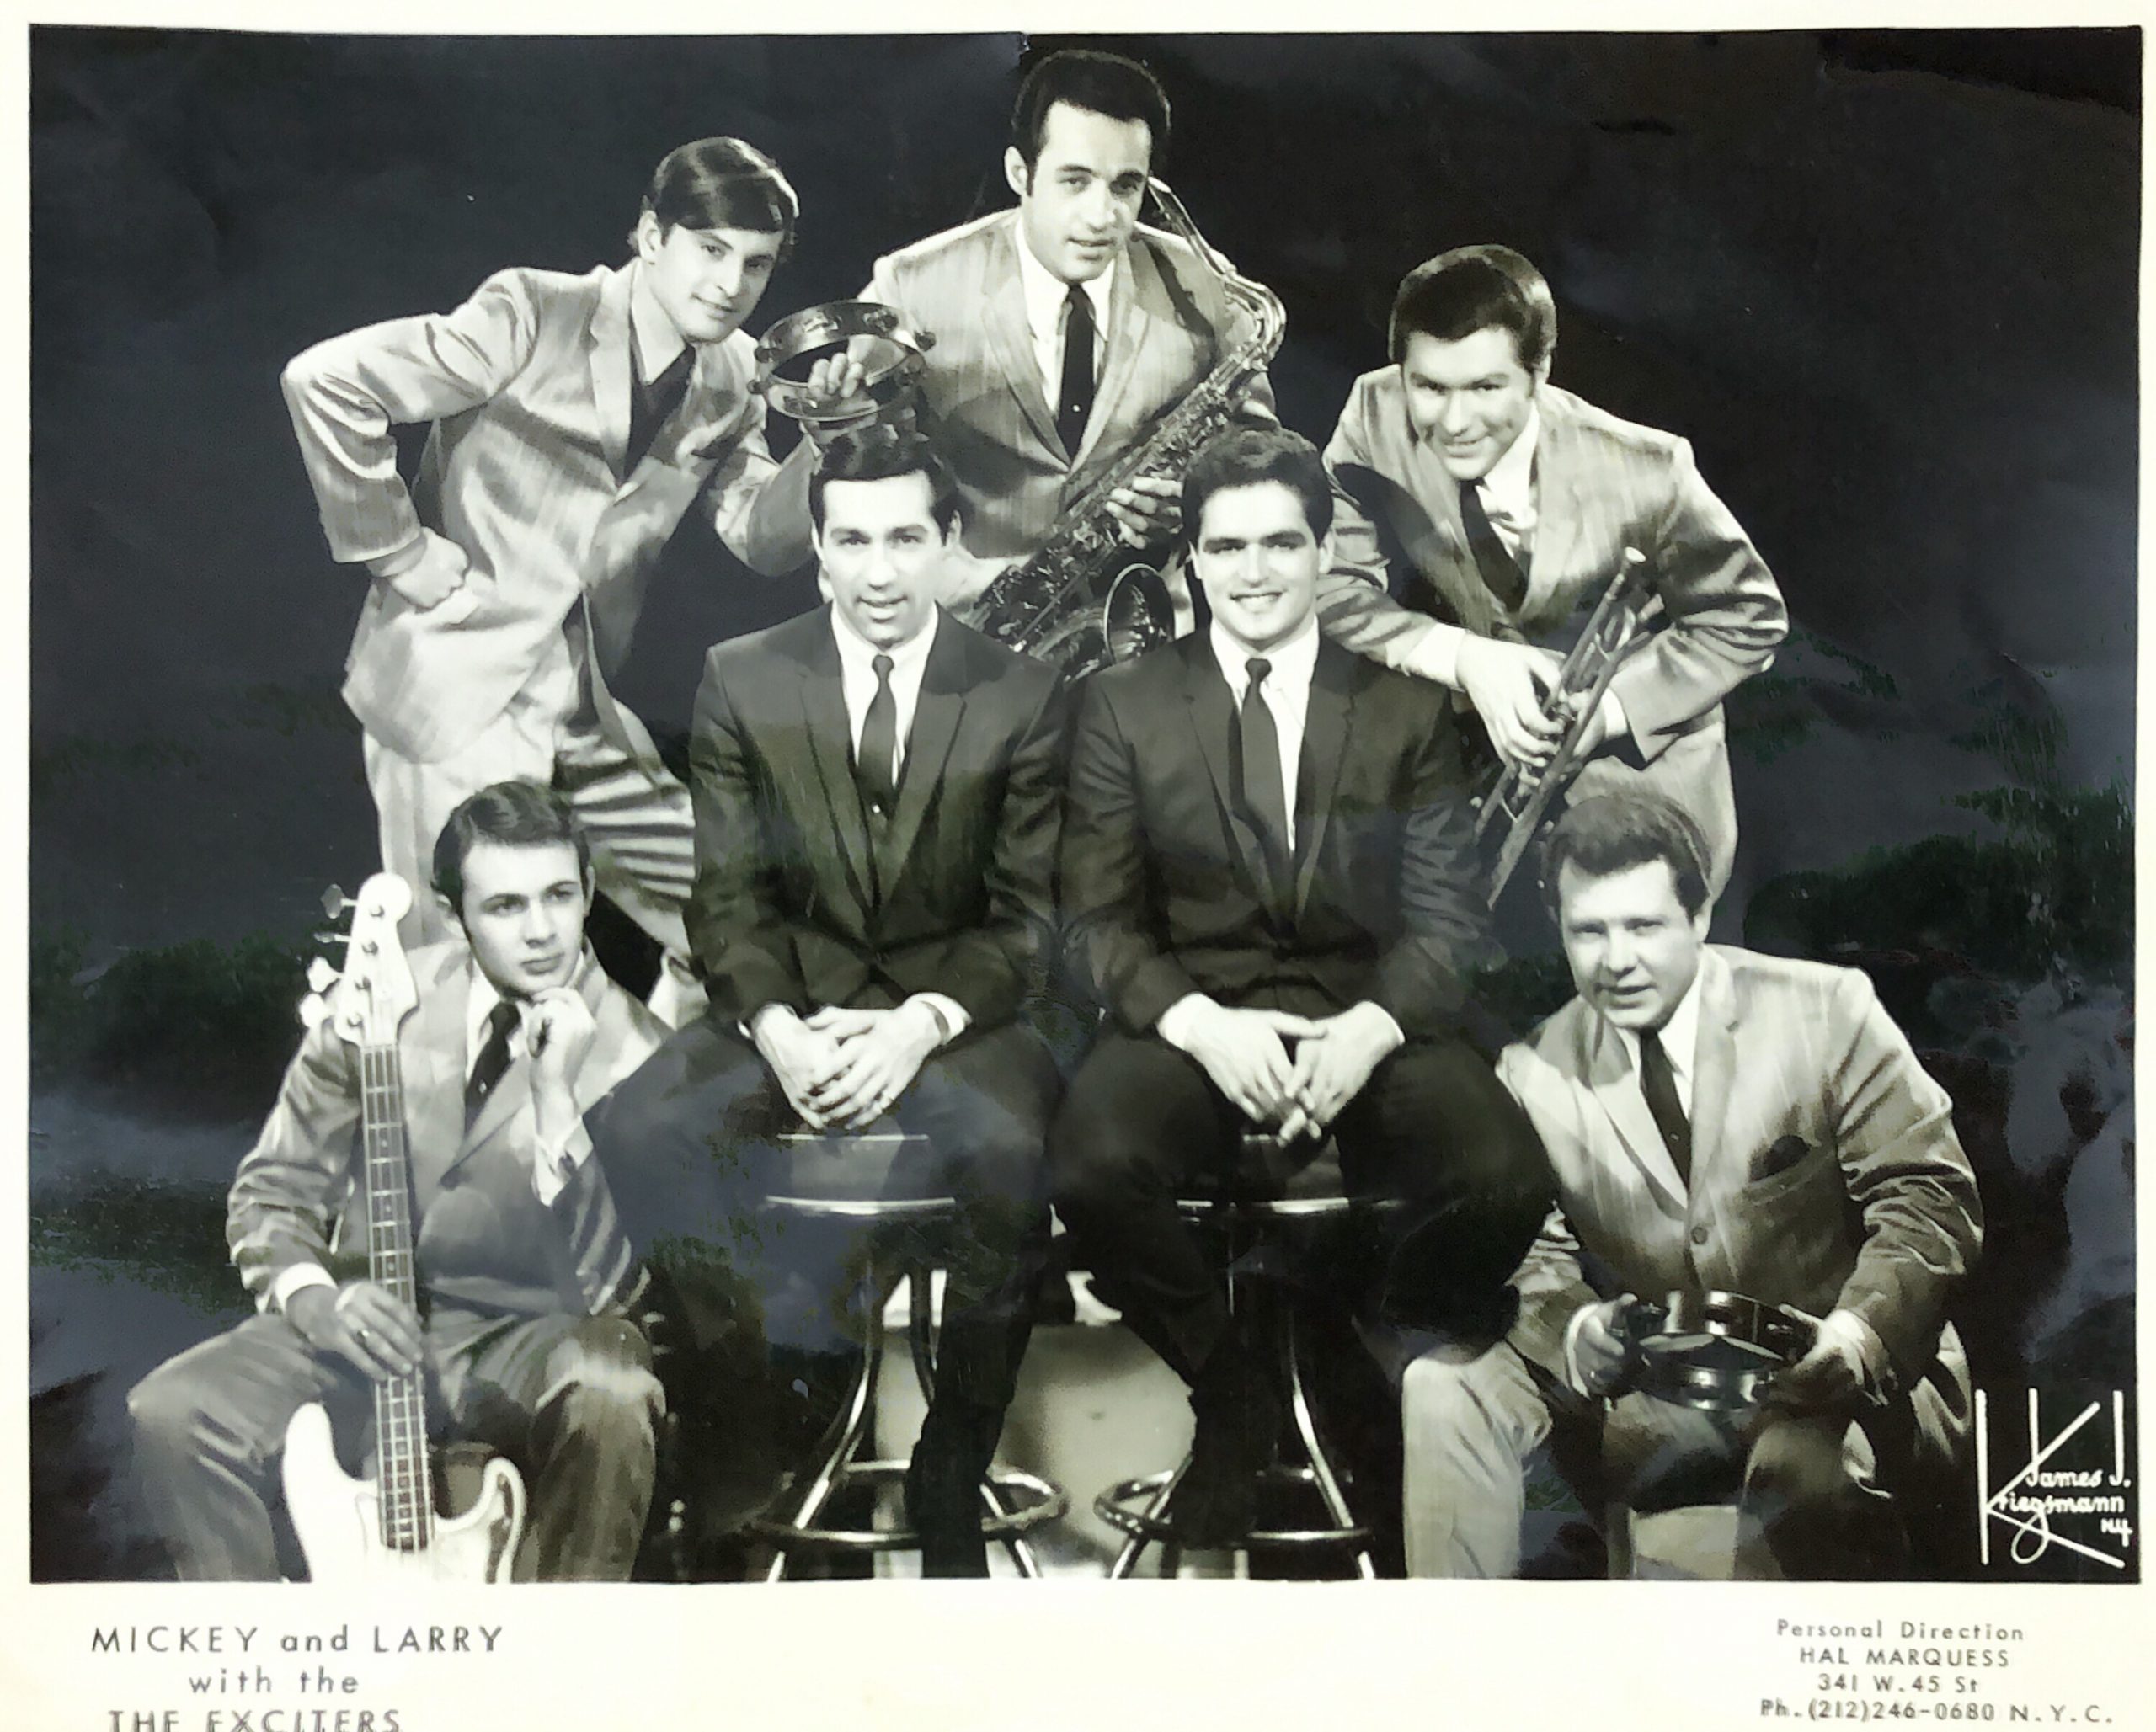 David DeArmond with Mickey, Larry and the Exciters